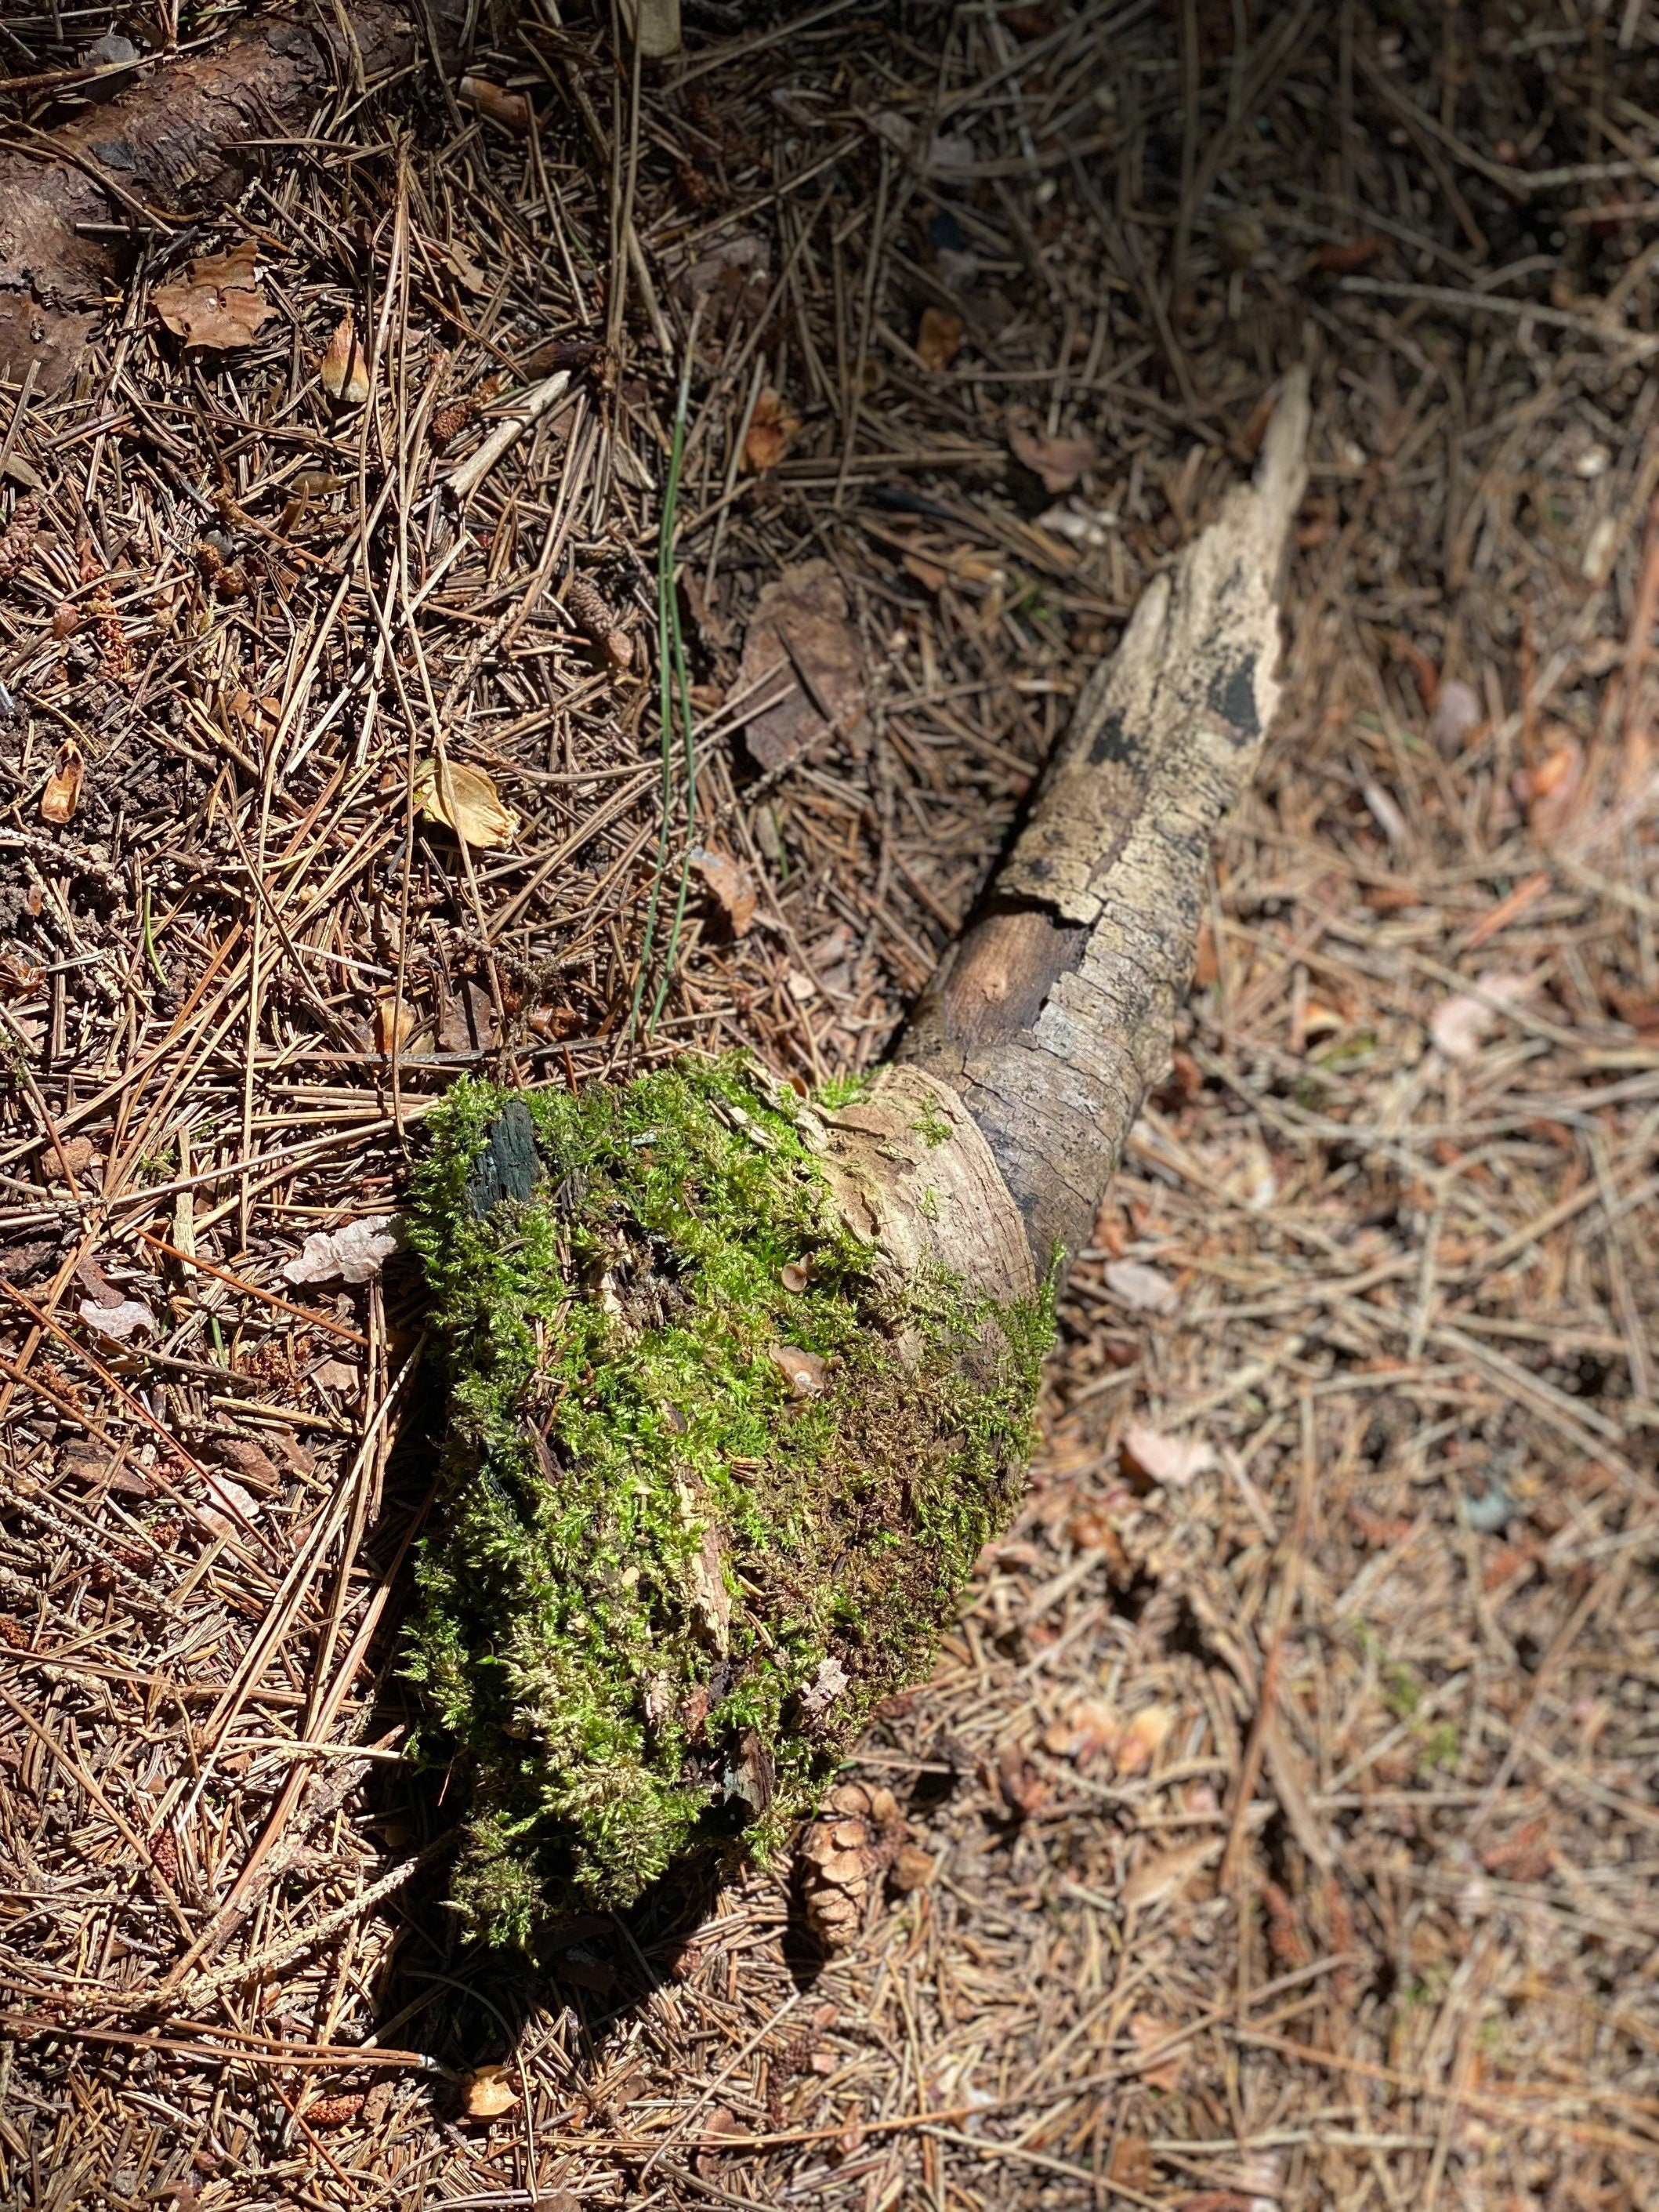 Moss Covered Log, Mossy Log, 12.5 Inches Long by 4.5 Inches Wide and 2 Inches High